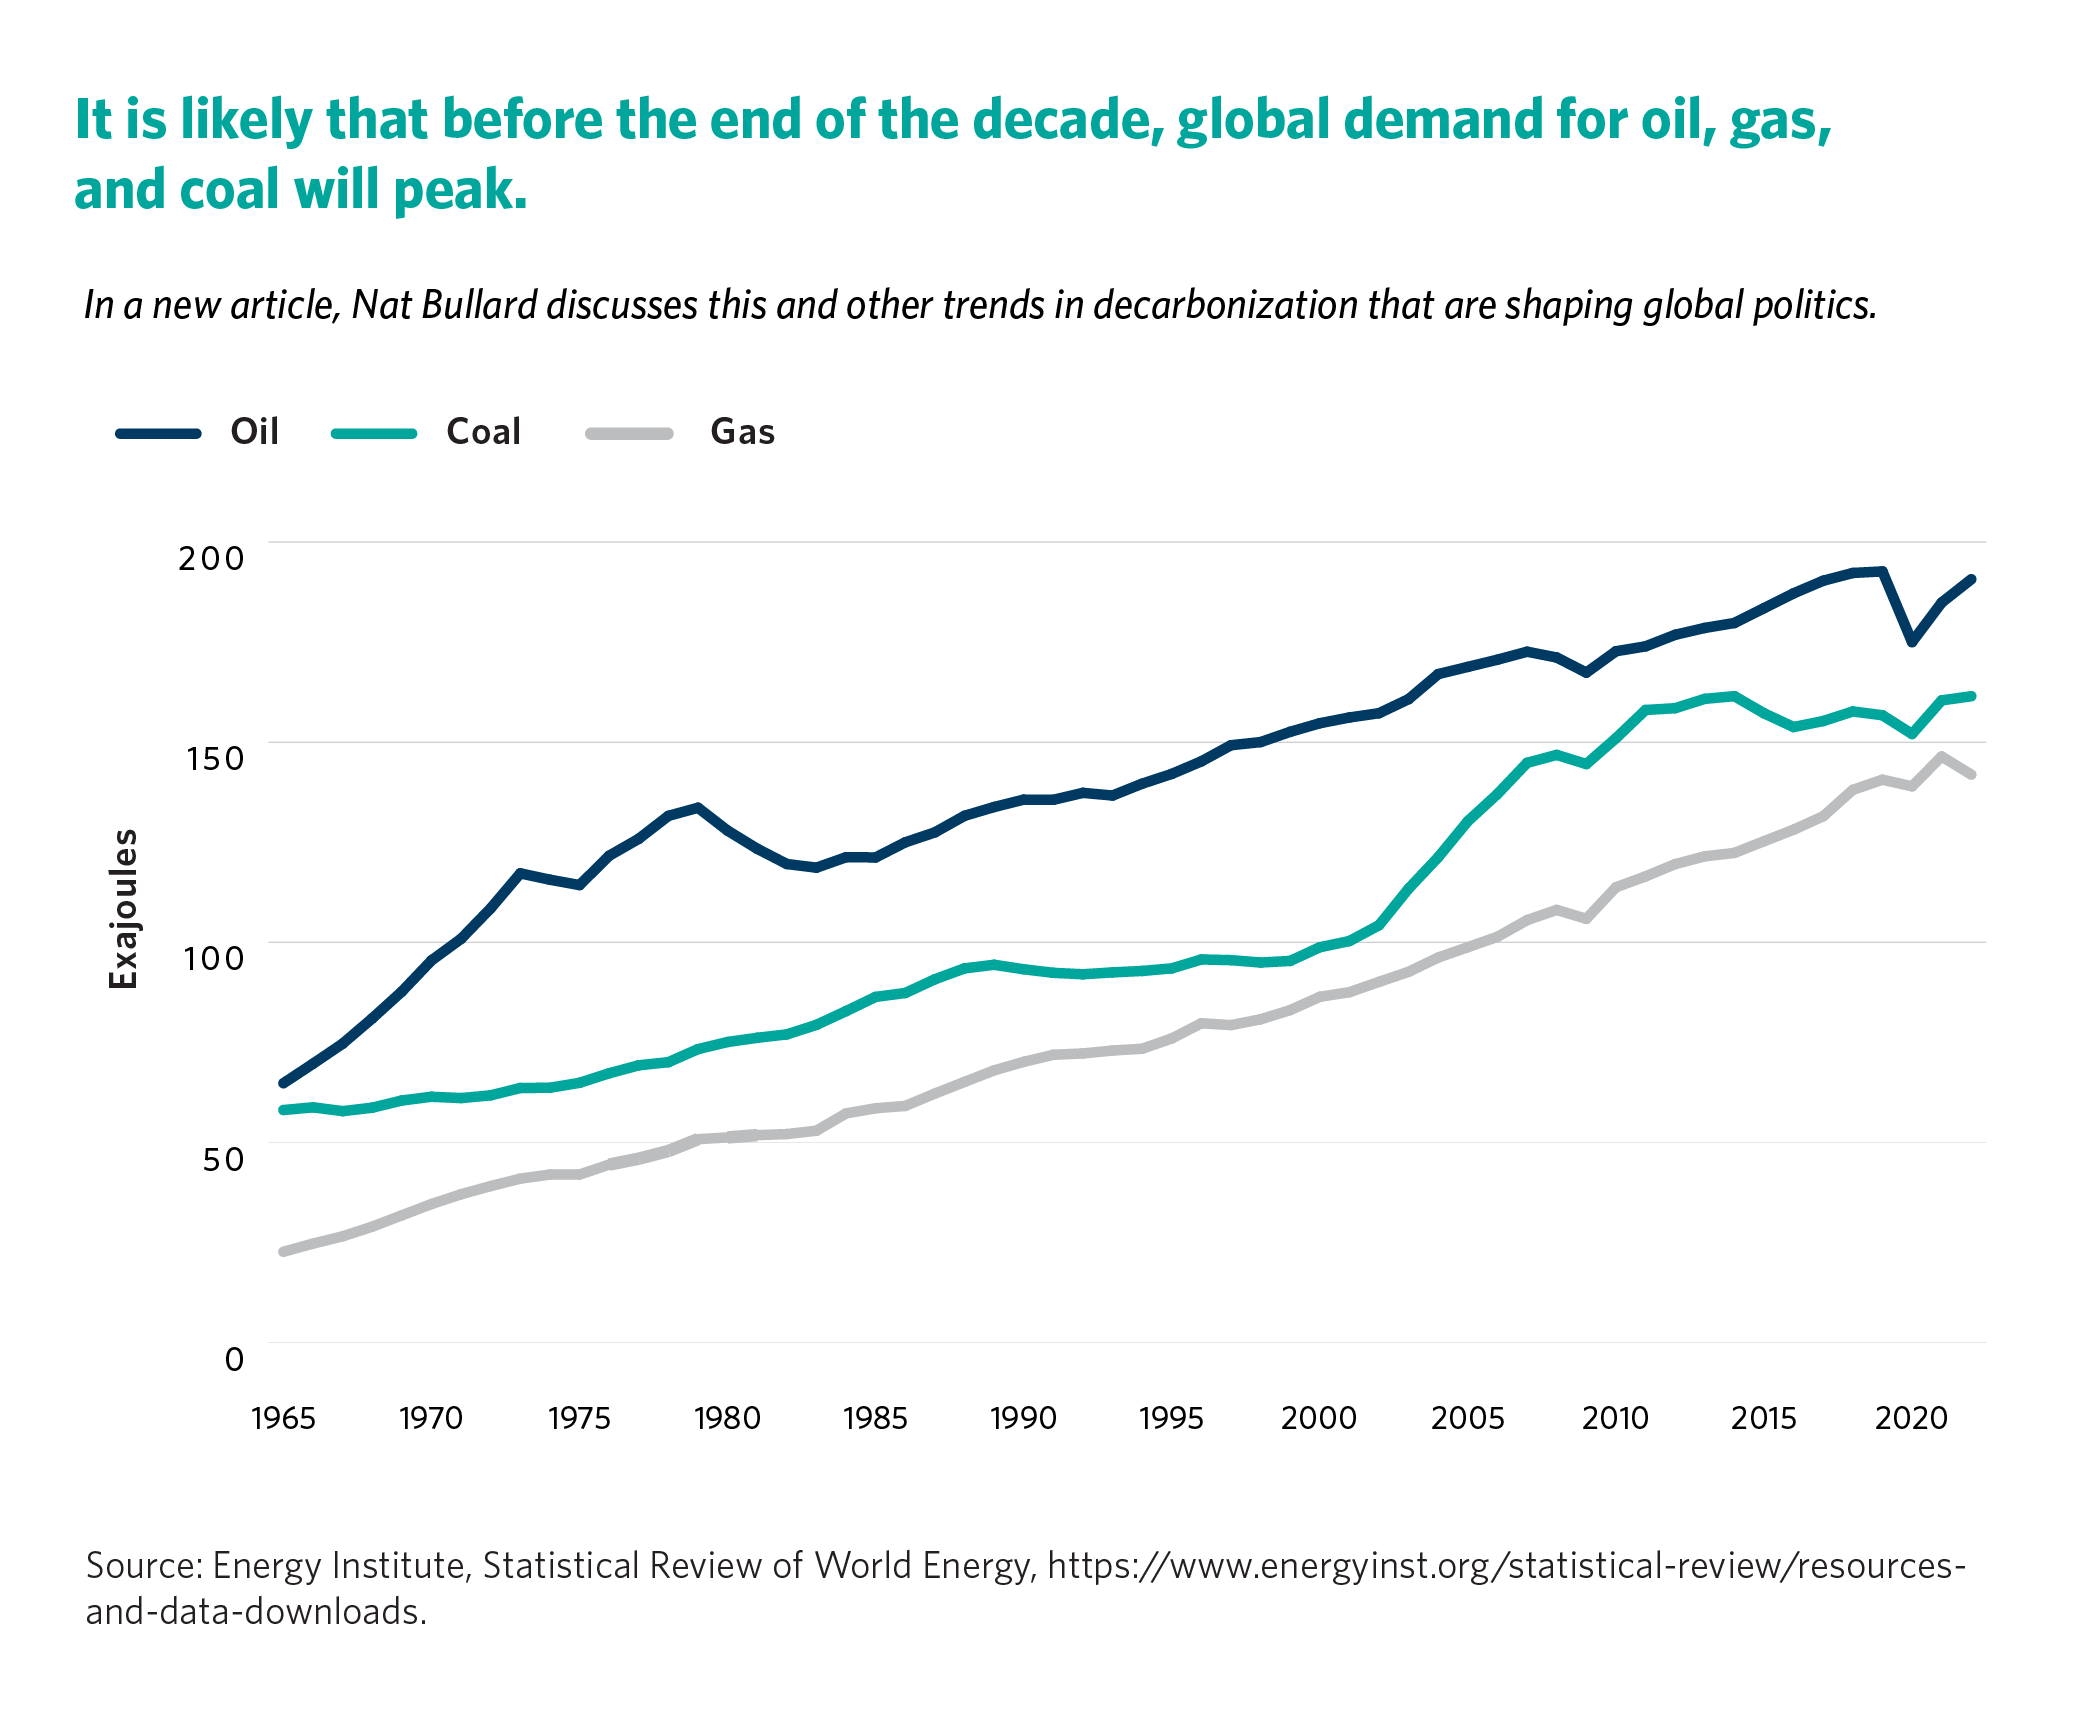 It is likely that before the end of the decade, global demand for oil, gas, and coal will peak.